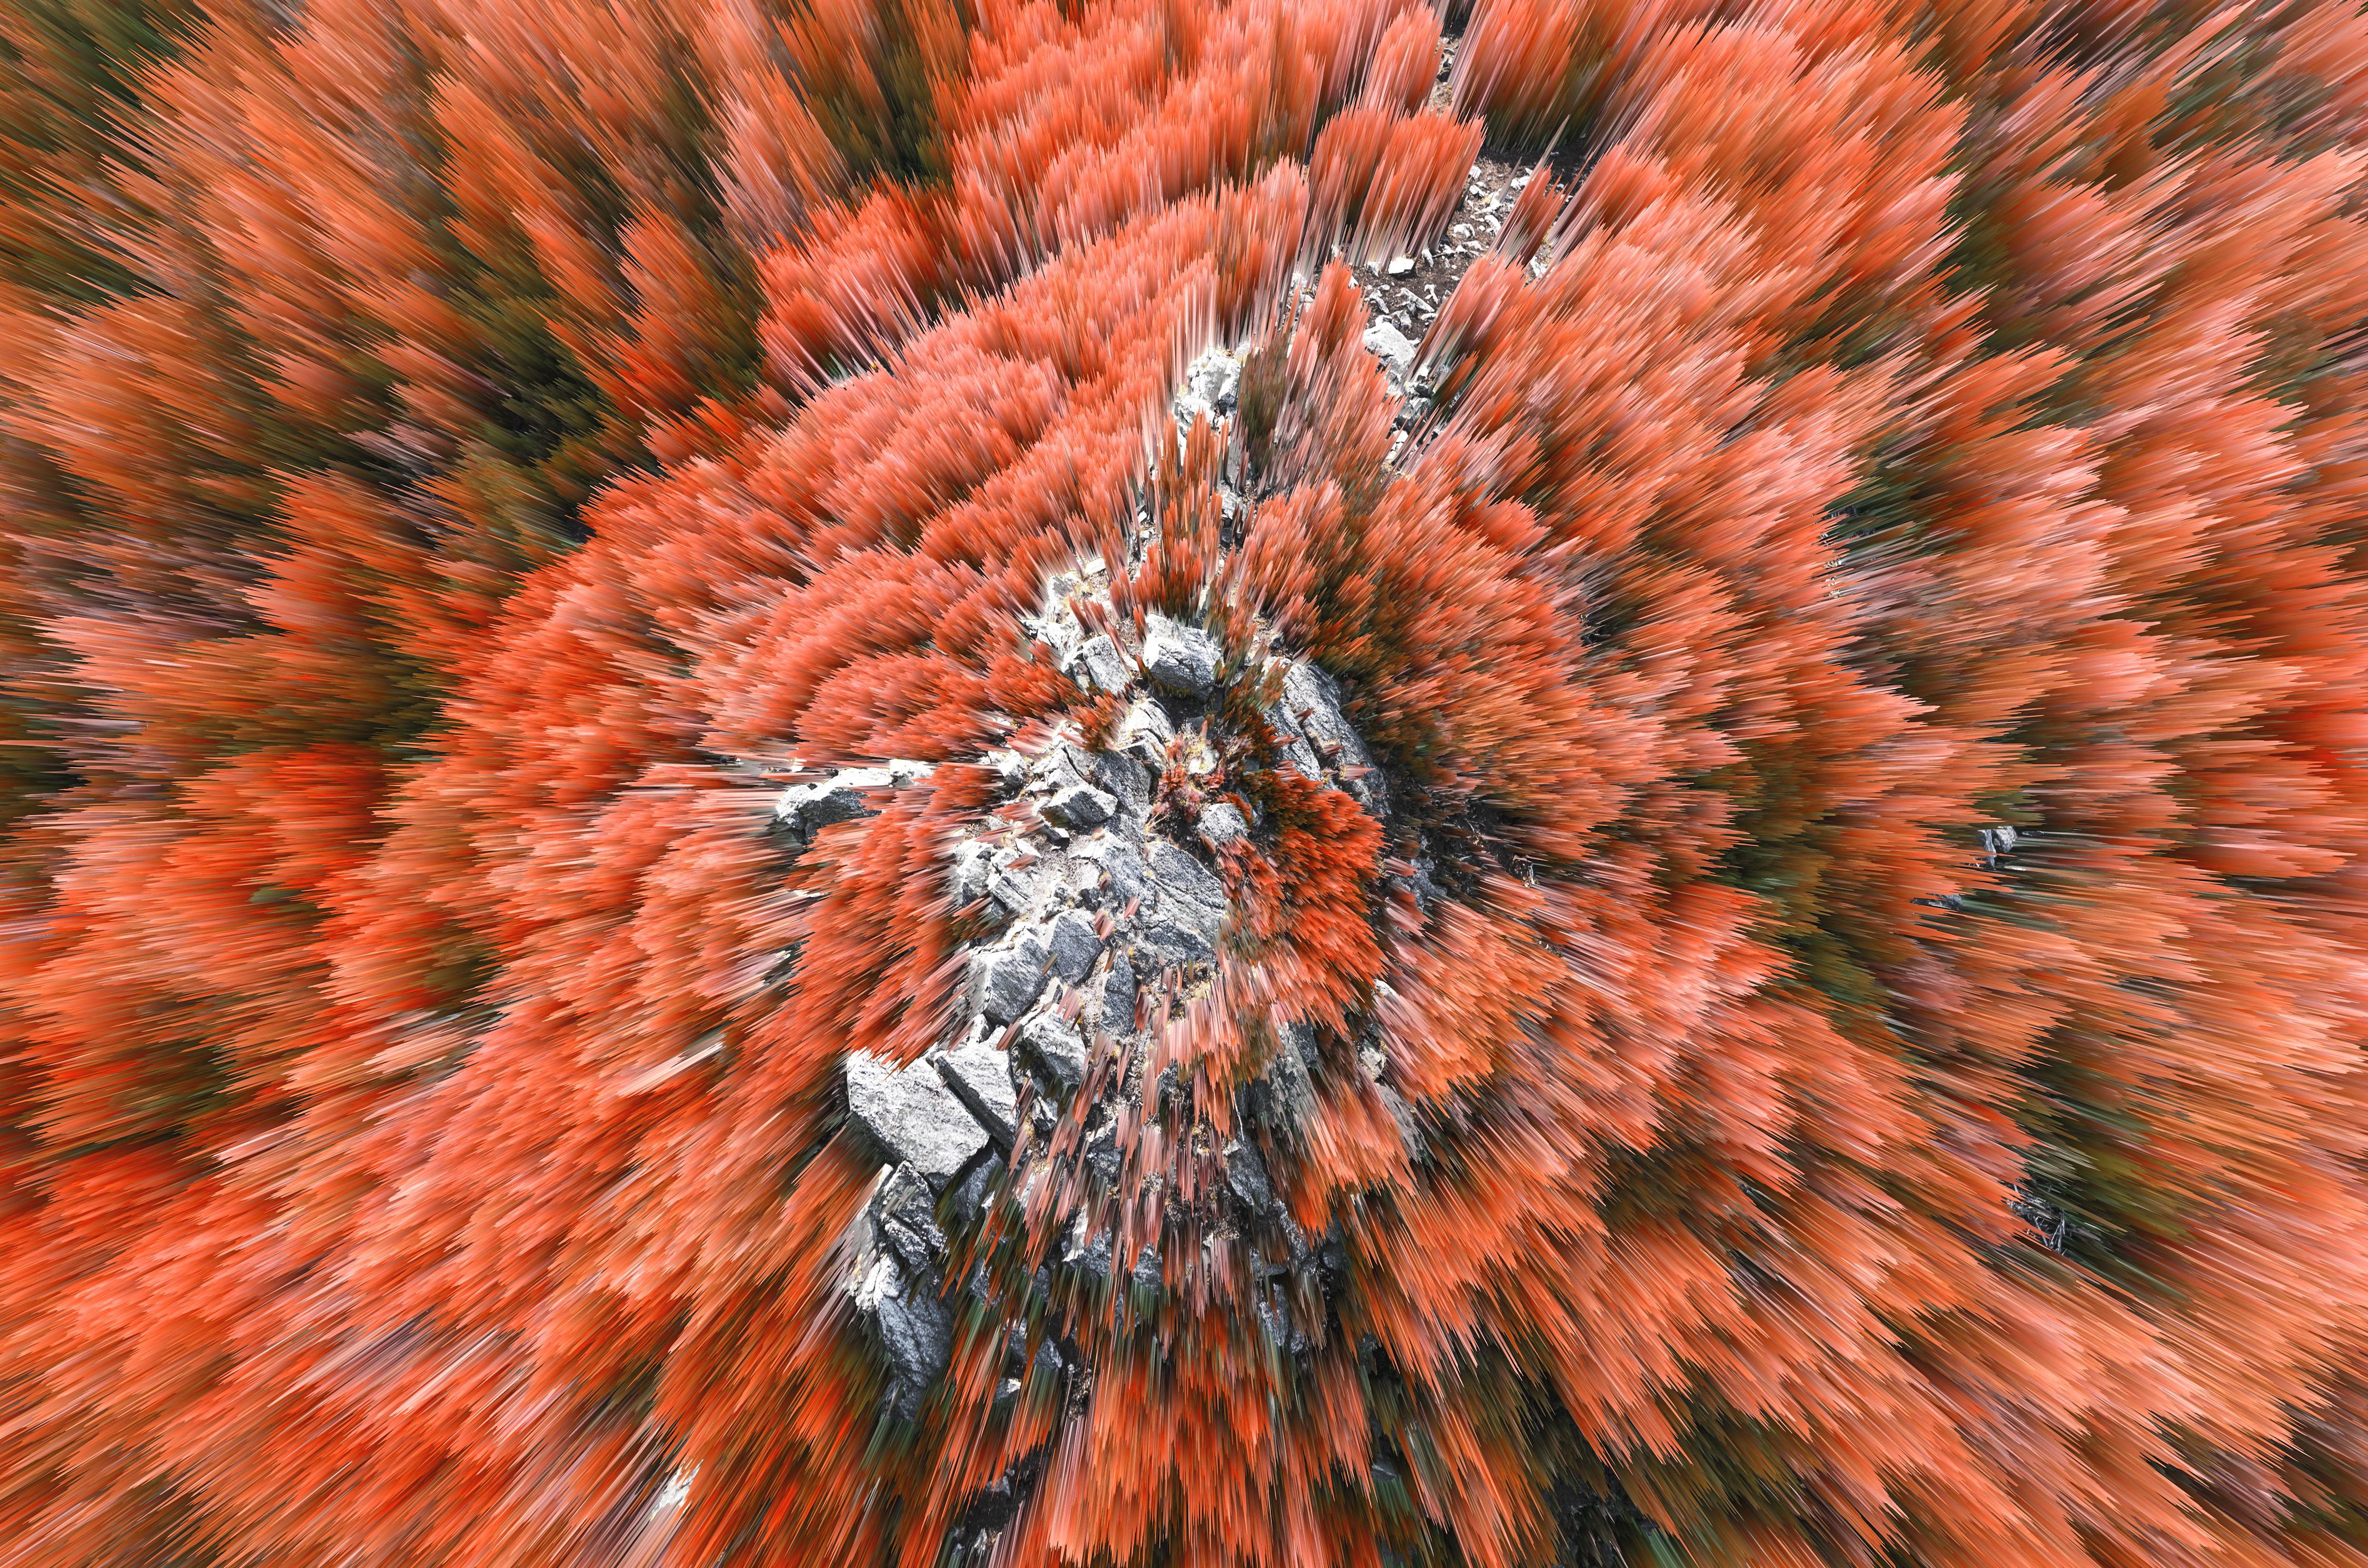 Abstract 3D Abstract Cinema 4D Nature Spikes Rocks Graphic Design Artwork CGi Motion Blur Spike 4500x2980